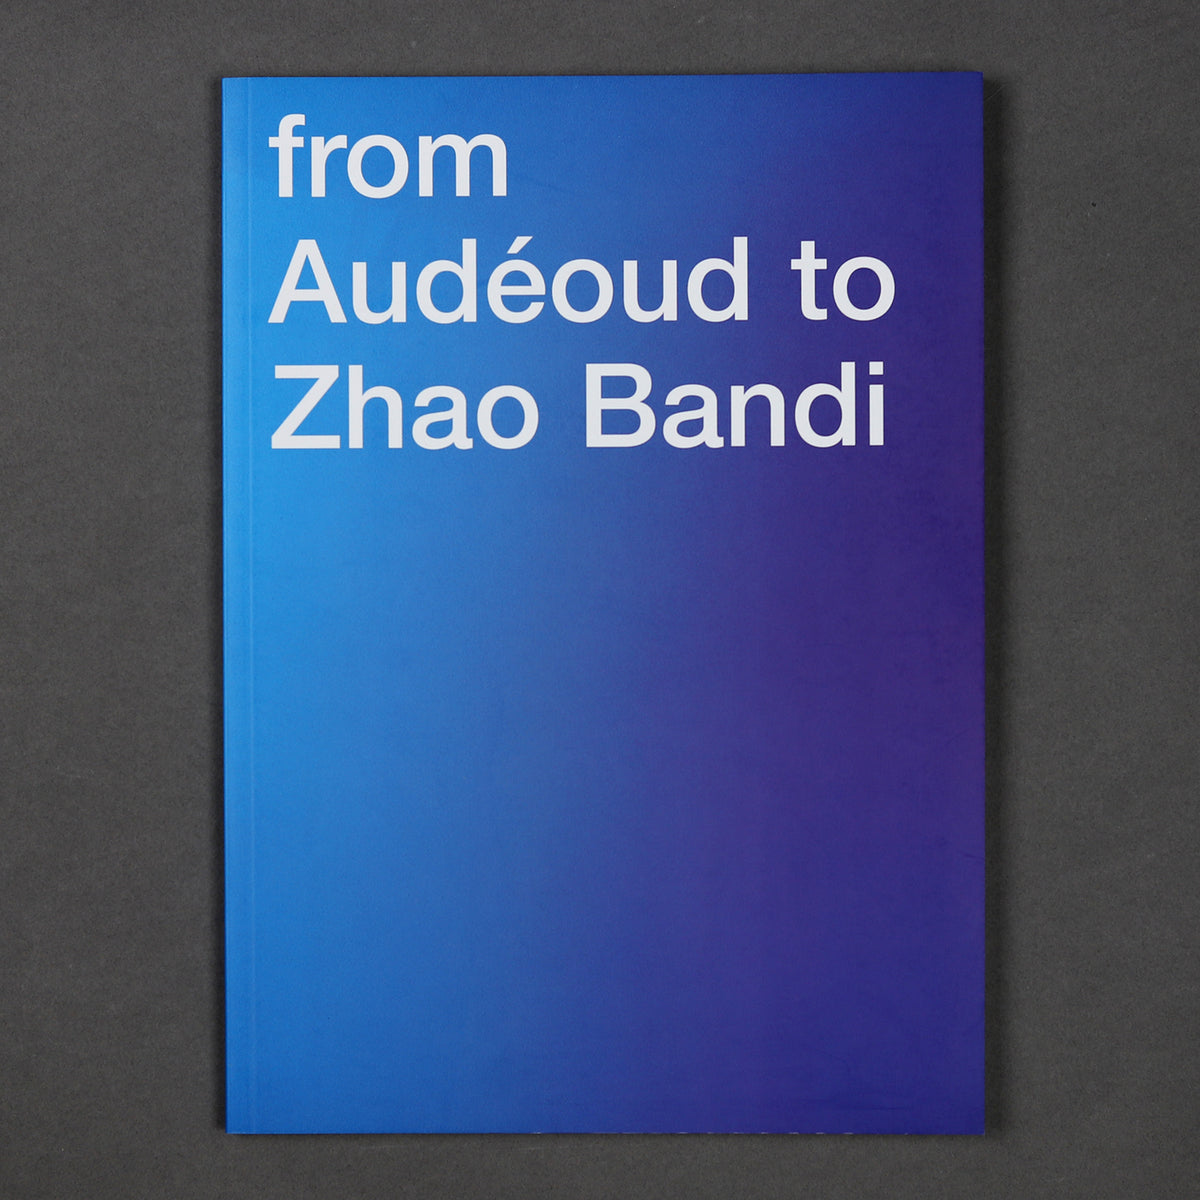 From Audeoud to Zhao Bandi: Selected Ikon Offsite Projects 2002-2004